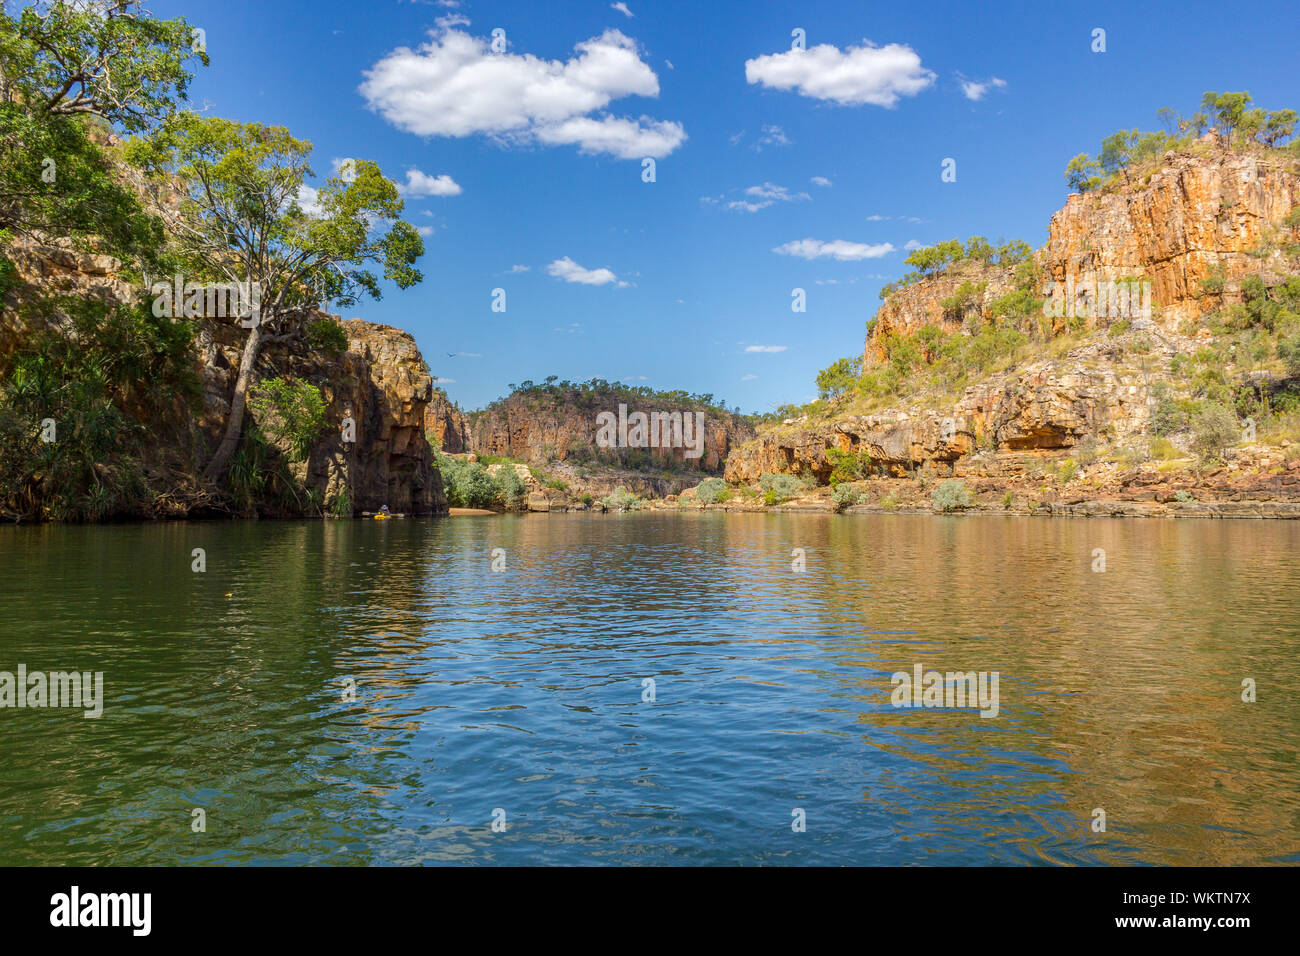 Katherine Gorge on an early morning cruise up the river with wonder reflections and beautiful scenery, Northern Territory Stock Photo